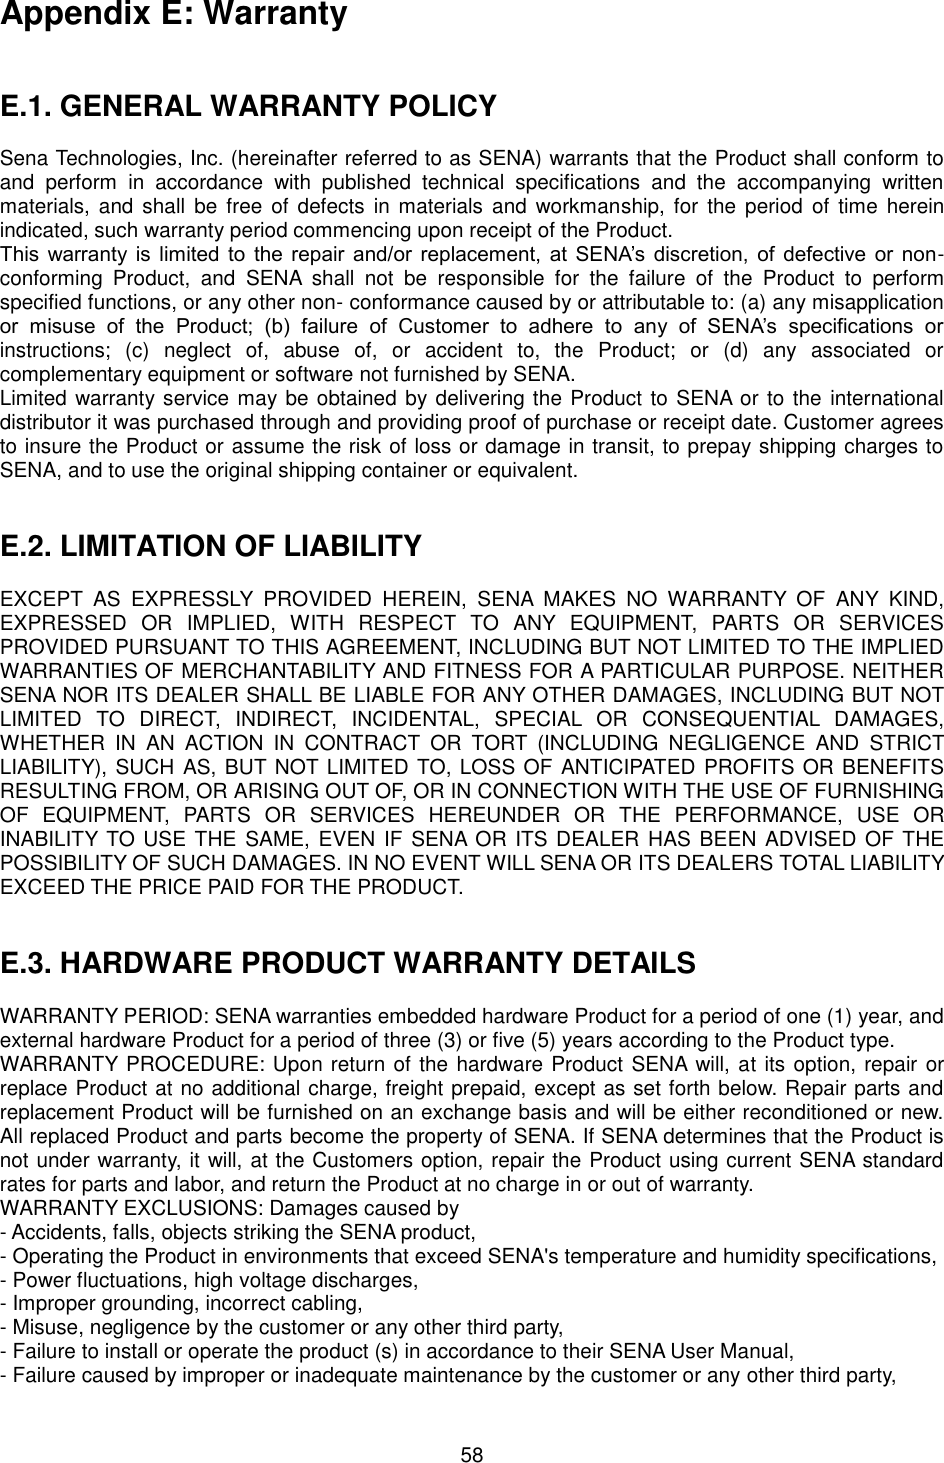   58 Appendix E: Warranty   E.1. GENERAL WARRANTY POLICY  Sena Technologies, Inc. (hereinafter referred to as SENA) warrants that the Product shall conform to and  perform  in  accordance  with  published  technical  specifications  and  the  accompanying  written materials,  and shall  be free of defects in materials  and  workmanship,  for  the period of time  herein indicated, such warranty period commencing upon receipt of the Product.   This  warranty is limited to  the repair  and/or replacement,  at SENA’s discretion, of  defective or non-conforming  Product,  and  SENA  shall  not  be  responsible  for  the  failure  of  the  Product  to  perform specified functions, or any other non- conformance caused by or attributable to: (a) any misapplication or  misuse  of  the  Product;  (b)  failure  of  Customer  to  adhere  to  any  of  SENA’s  specifications  or instructions;  (c)  neglect  of,  abuse  of,  or  accident  to,  the  Product;  or  (d)  any  associated  or complementary equipment or software not furnished by SENA.   Limited warranty service may be obtained by delivering the Product to SENA or to the international distributor it was purchased through and providing proof of purchase or receipt date. Customer agrees to insure the Product or assume the risk of loss or damage in transit, to prepay shipping charges to SENA, and to use the original shipping container or equivalent.     E.2. LIMITATION OF LIABILITY  EXCEPT  AS  EXPRESSLY  PROVIDED  HEREIN,  SENA  MAKES  NO  WARRANTY  OF  ANY  KIND, EXPRESSED  OR  IMPLIED,  WITH  RESPECT  TO  ANY  EQUIPMENT,  PARTS  OR  SERVICES PROVIDED PURSUANT TO THIS AGREEMENT, INCLUDING BUT NOT LIMITED TO THE IMPLIED WARRANTIES OF MERCHANTABILITY AND FITNESS FOR A PARTICULAR PURPOSE. NEITHER SENA NOR ITS DEALER SHALL BE LIABLE FOR ANY OTHER DAMAGES, INCLUDING BUT NOT LIMITED  TO  DIRECT,  INDIRECT,  INCIDENTAL,  SPECIAL  OR  CONSEQUENTIAL  DAMAGES, WHETHER  IN  AN  ACTION  IN  CONTRACT  OR  TORT  (INCLUDING  NEGLIGENCE  AND  STRICT LIABILITY), SUCH AS, BUT NOT LIMITED TO, LOSS OF  ANTICIPATED PROFITS OR BENEFITS RESULTING FROM, OR ARISING OUT OF, OR IN CONNECTION WITH THE USE OF FURNISHING OF  EQUIPMENT,  PARTS  OR  SERVICES  HEREUNDER  OR  THE  PERFORMANCE,  USE  OR INABILITY TO USE THE SAME, EVEN  IF SENA OR ITS DEALER HAS BEEN ADVISED OF THE POSSIBILITY OF SUCH DAMAGES. IN NO EVENT WILL SENA OR ITS DEALERS TOTAL LIABILITY EXCEED THE PRICE PAID FOR THE PRODUCT.   E.3. HARDWARE PRODUCT WARRANTY DETAILS  WARRANTY PERIOD: SENA warranties embedded hardware Product for a period of one (1) year, and external hardware Product for a period of three (3) or five (5) years according to the Product type. WARRANTY PROCEDURE: Upon return of the hardware Product SENA will, at its option, repair or replace Product at no additional charge, freight prepaid, except as set forth below. Repair parts and replacement Product will be furnished on an exchange basis and will be either reconditioned or new. All replaced Product and parts become the property of SENA. If SENA determines that the Product is not under warranty, it will, at the Customers option, repair the Product using current SENA standard rates for parts and labor, and return the Product at no charge in or out of warranty.   WARRANTY EXCLUSIONS: Damages caused by - Accidents, falls, objects striking the SENA product, - Operating the Product in environments that exceed SENA&apos;s temperature and humidity specifications, - Power fluctuations, high voltage discharges, - Improper grounding, incorrect cabling, - Misuse, negligence by the customer or any other third party, - Failure to install or operate the product (s) in accordance to their SENA User Manual, - Failure caused by improper or inadequate maintenance by the customer or any other third party, 